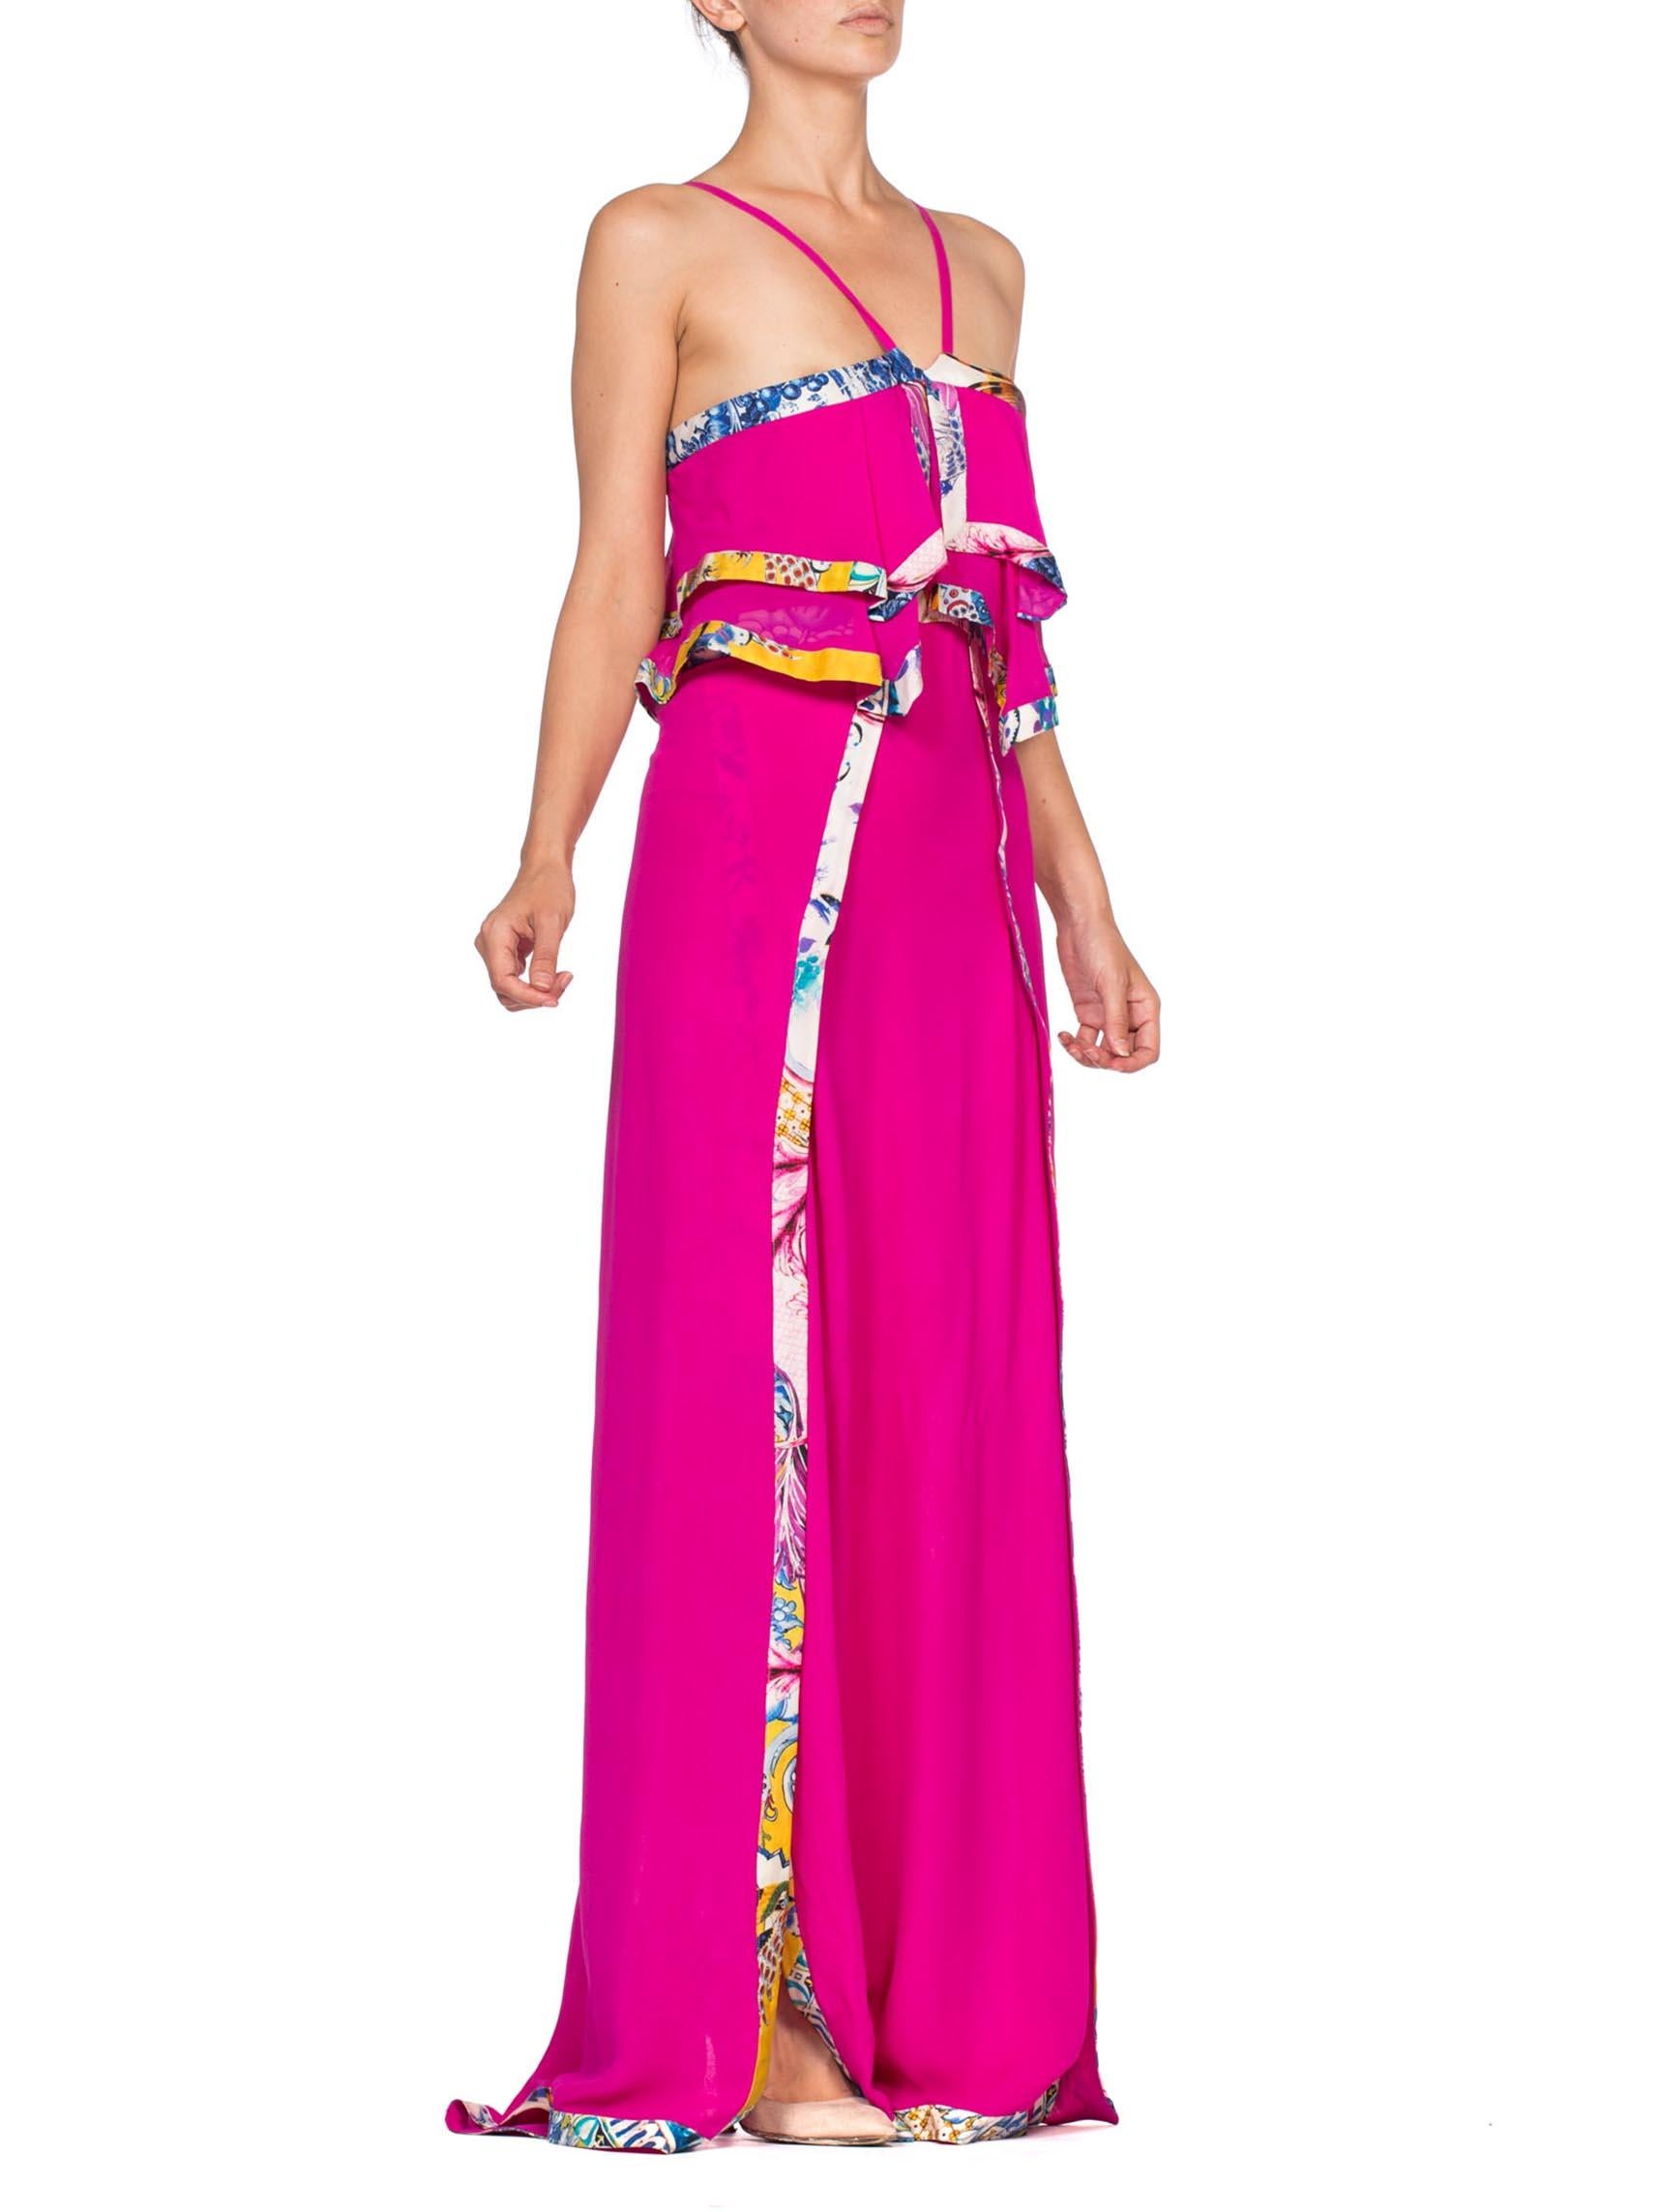 Tagged a European size 40 1990'S ROBERTO CAVALLI Hot Pink Silk Chiffon Double Slit Gown Trimmed In Yellow & Blue 